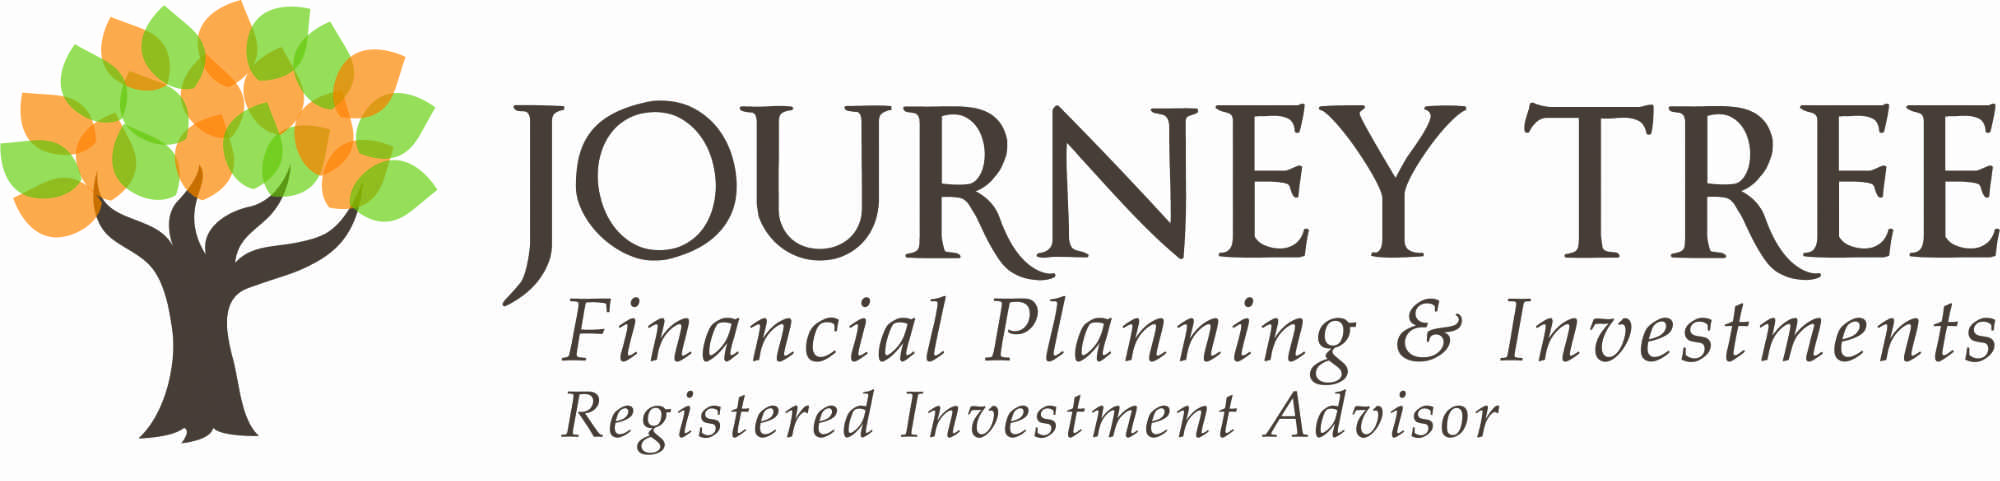 Journey Tree Financial Planning and Investments